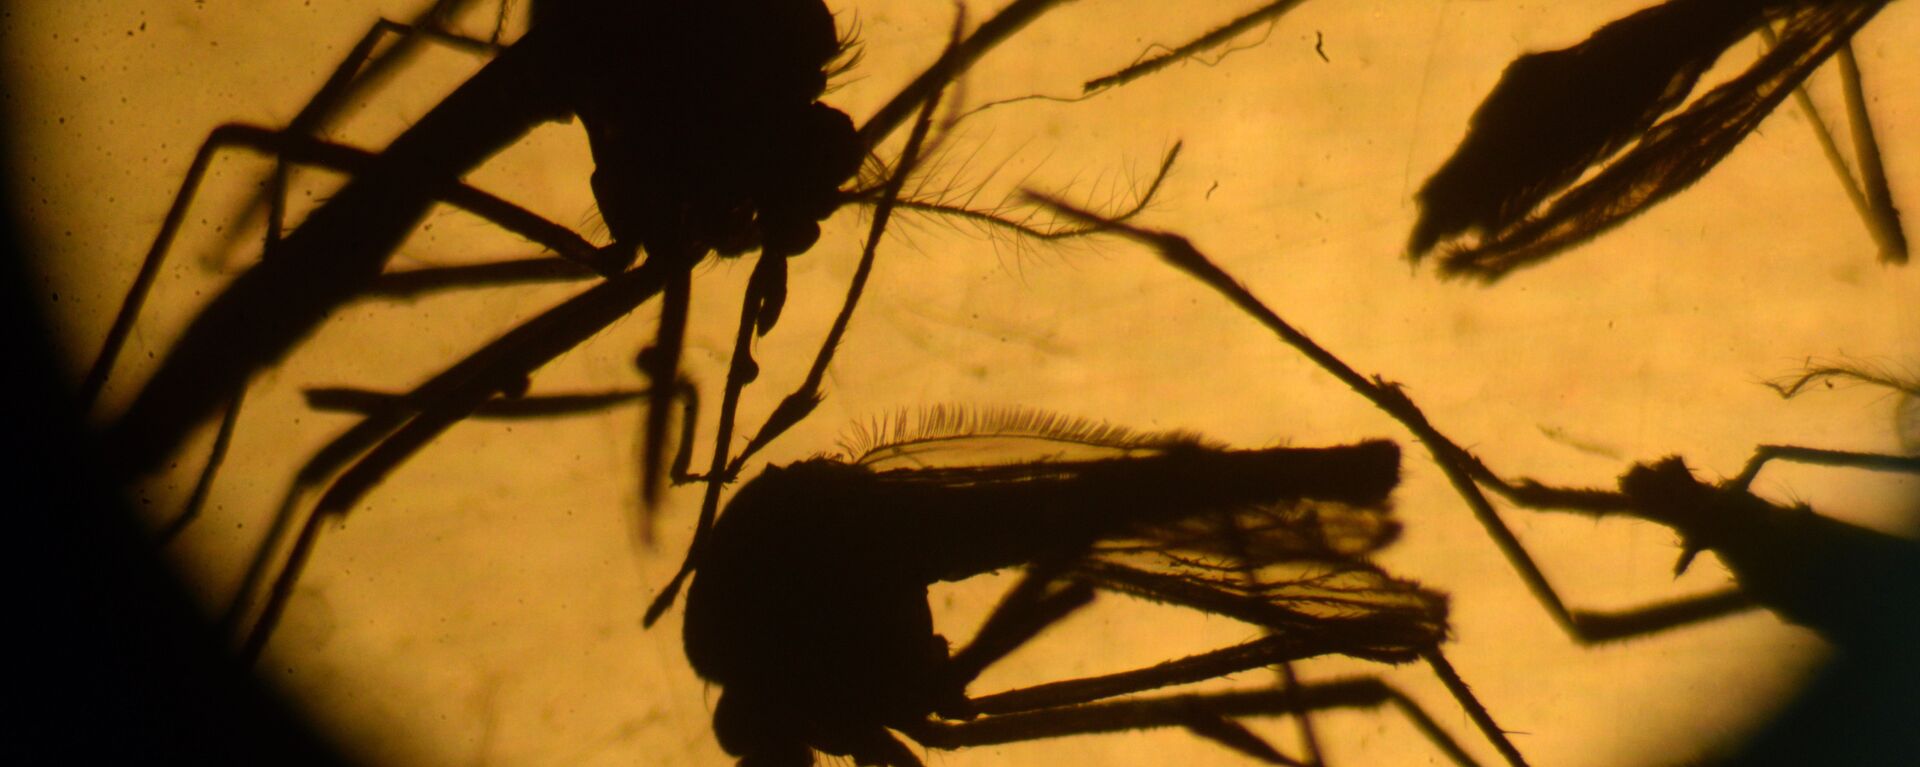 Aedes aegypti mosquitos are photographed in a laboratory at the University of El Salvador, in San Salvador, on February 3, 2016. - Sputnik Mundo, 1920, 04.05.2021